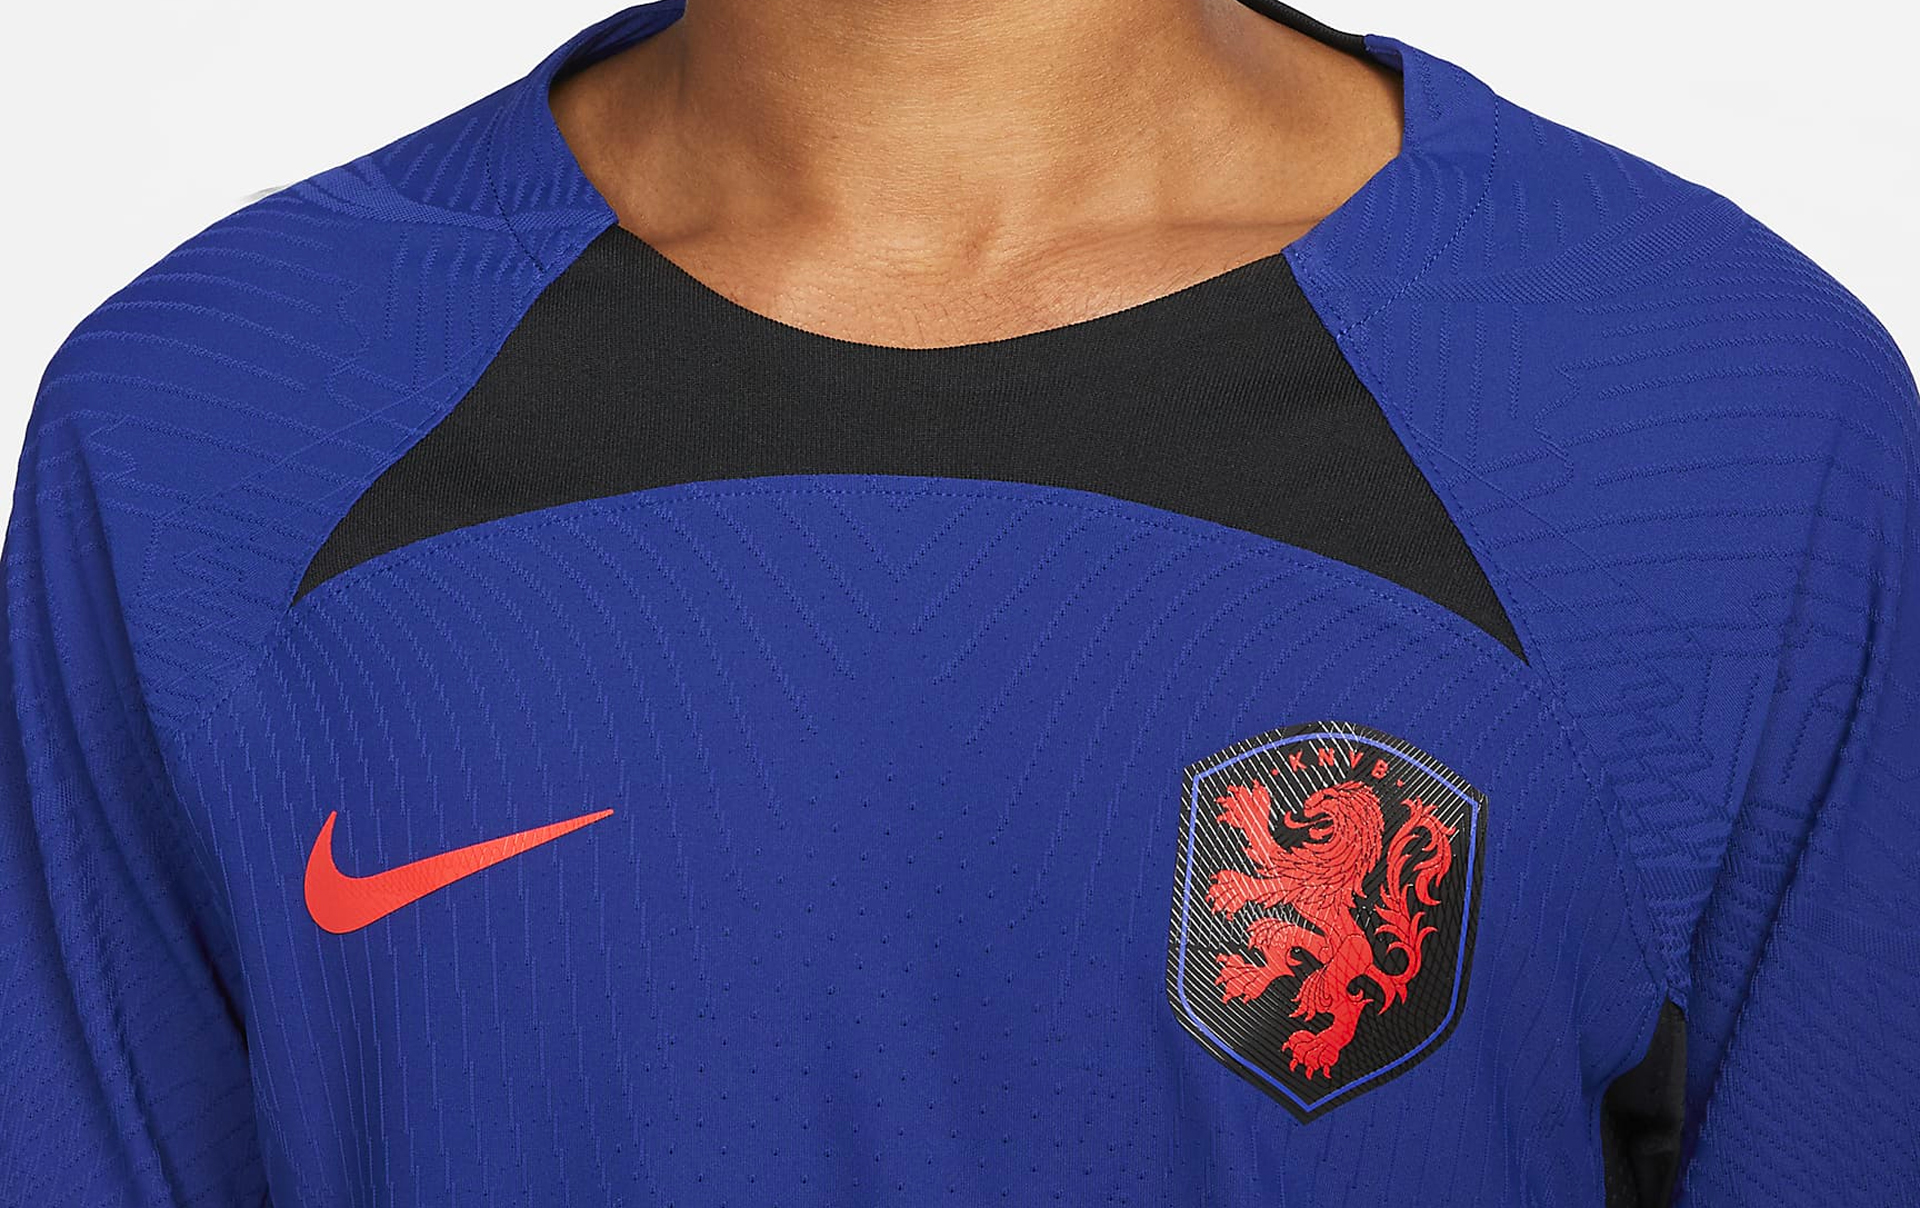 Netherlands 2022 World Cup away kit another vintage strip FourFourTwo